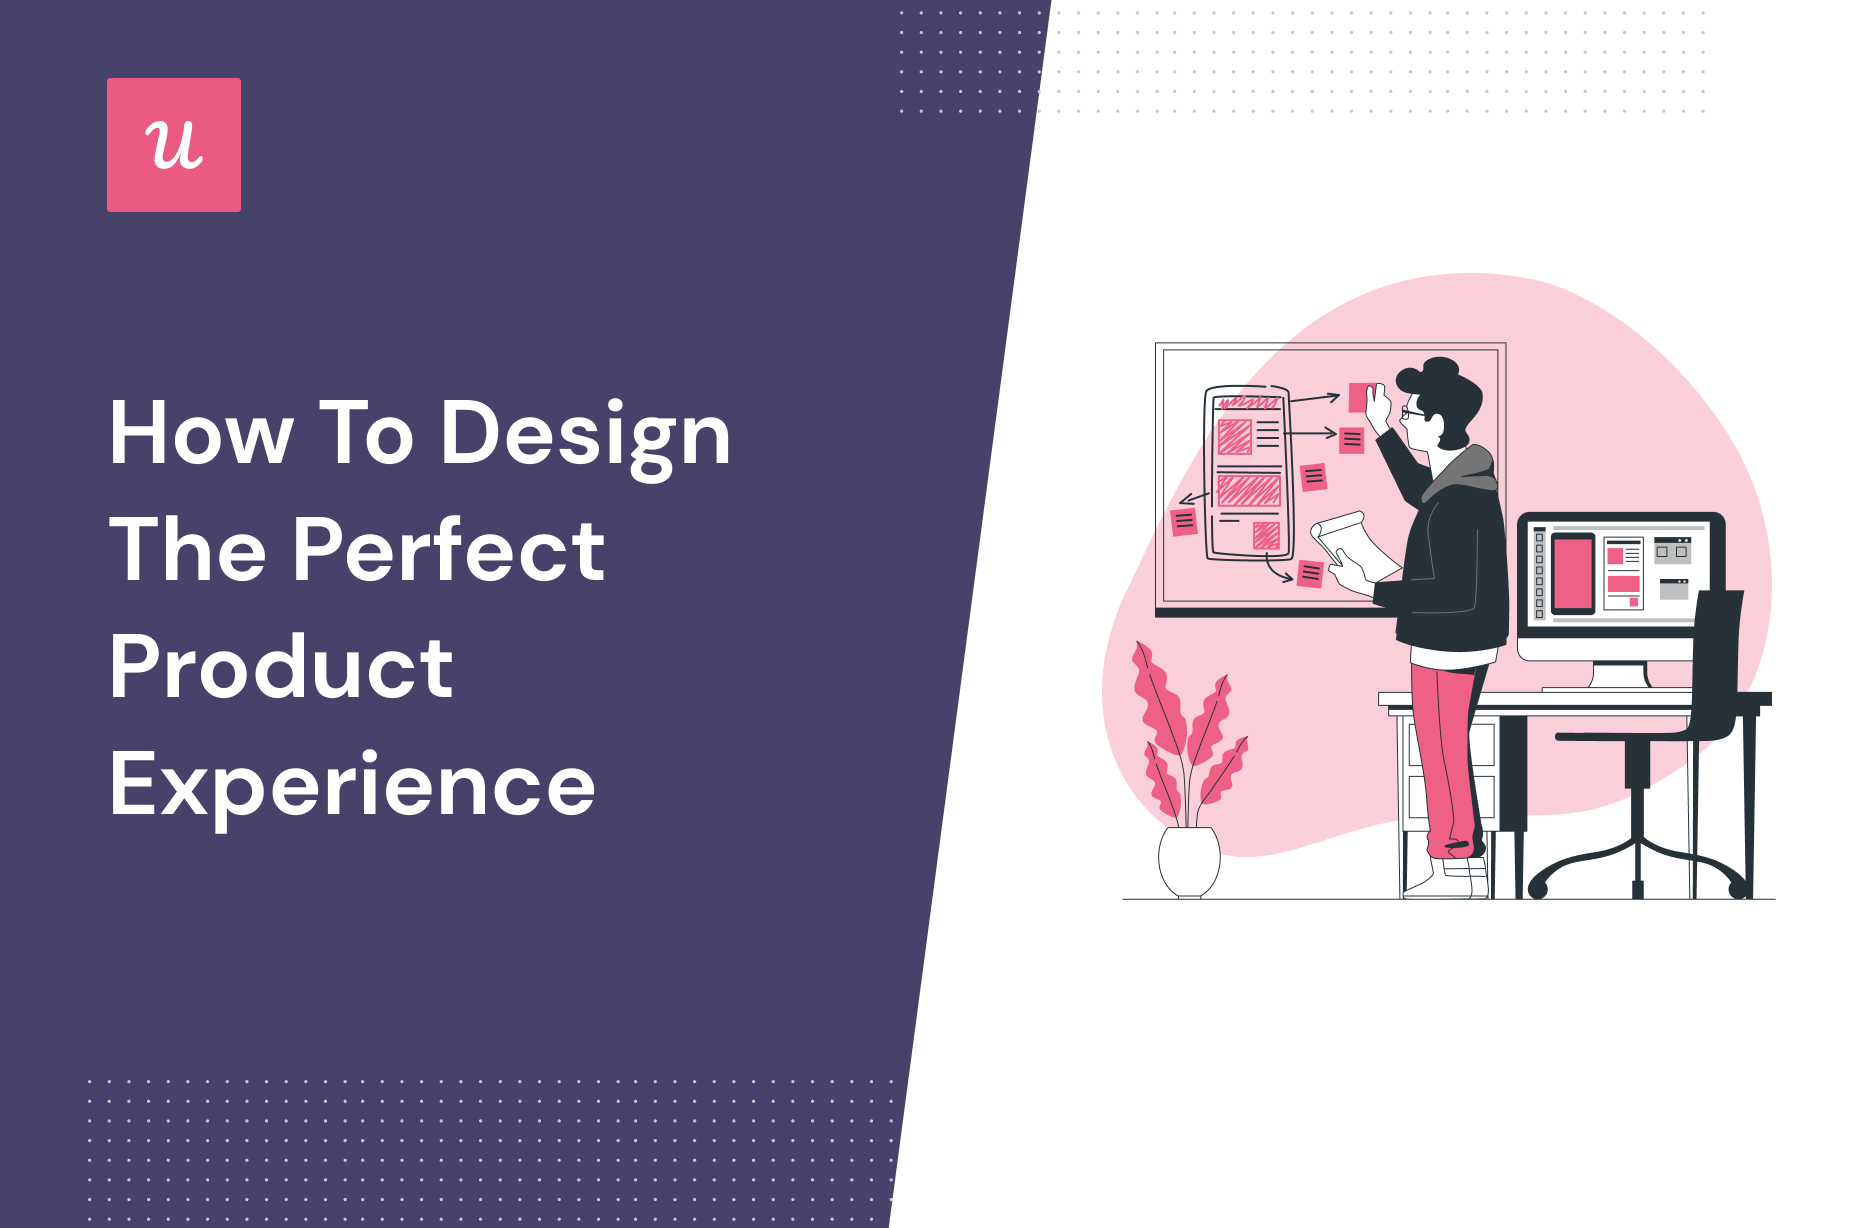 How To Design The Perfect Product Experience